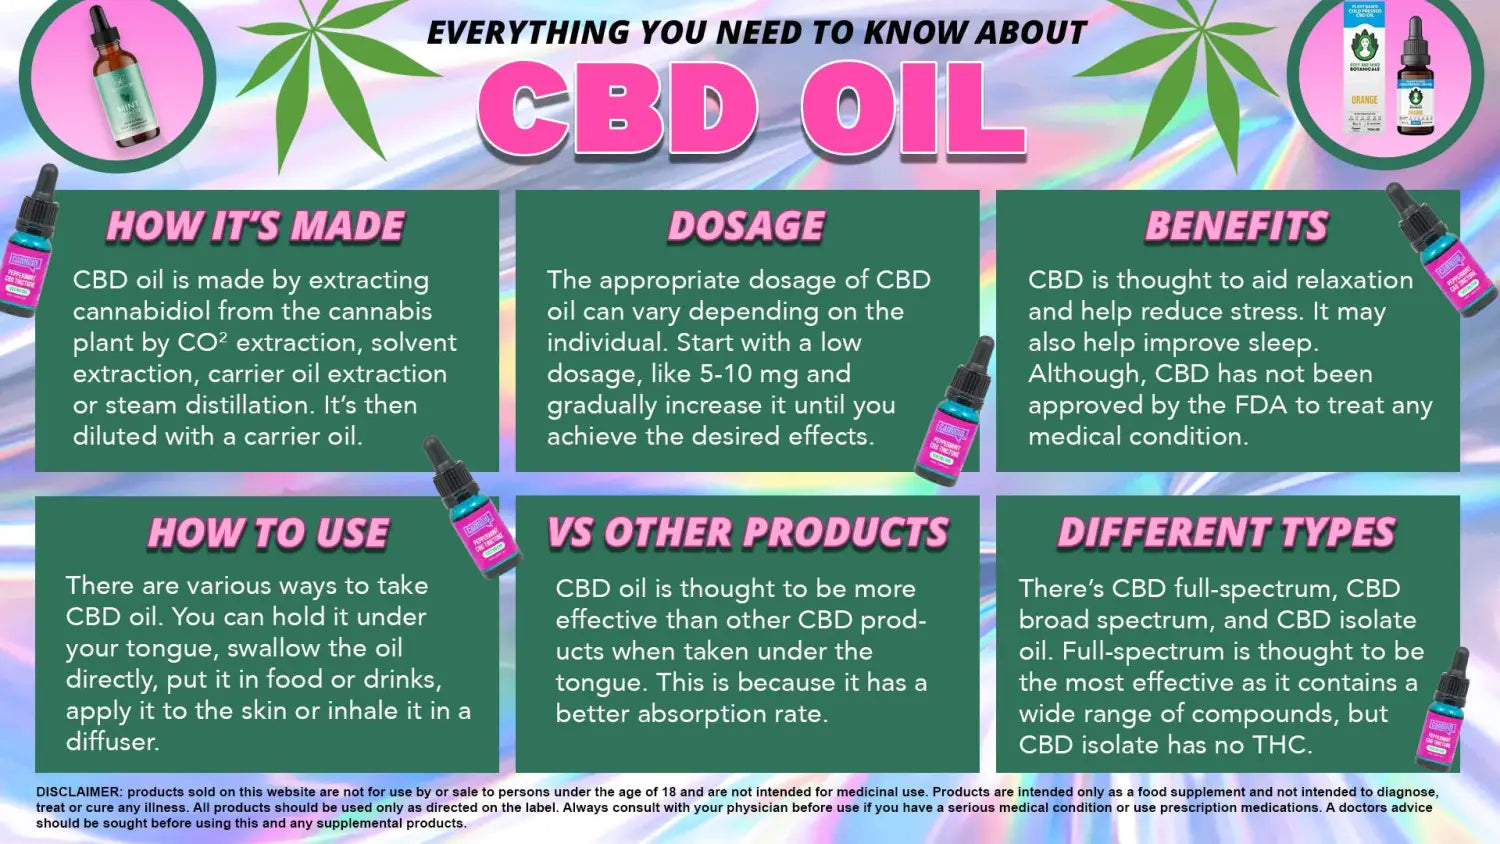 The Legality of CBD Oil Products in the UK